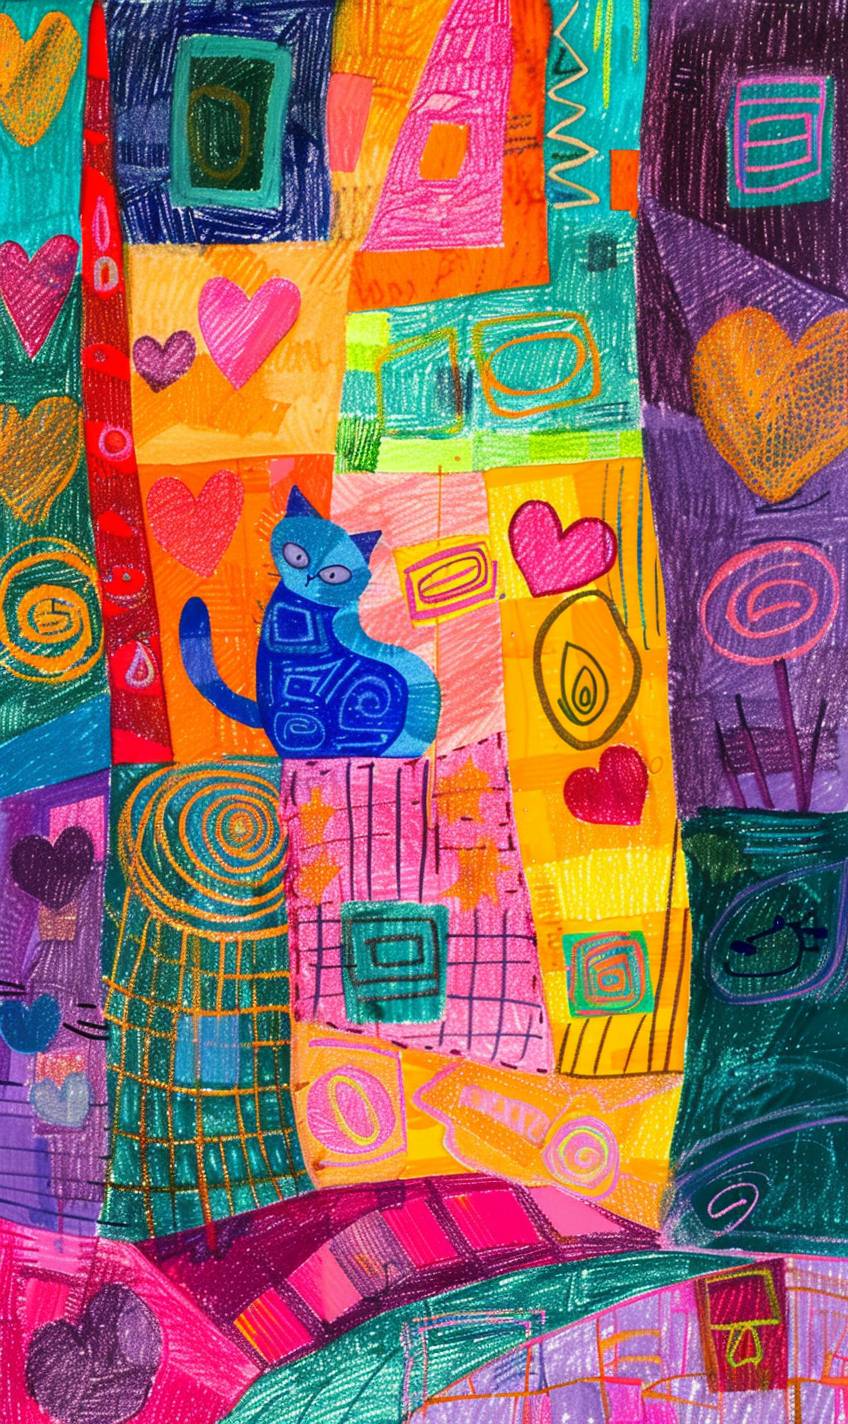 Risograph artwork featuring a holographic scene with a cat, created using oil pastels in the art style of Itzchak Tarkay. The design includes many heart patterns and showcases rich front and back views. Color blocks are expressed in a simplistic way, reminiscent of surrealism. The colors are mainly bright and colorful, resembling the roughness of oil painting and sketchy fauvism, in the style of Maira Kalman and Matisse. The parameter information has been filtered.